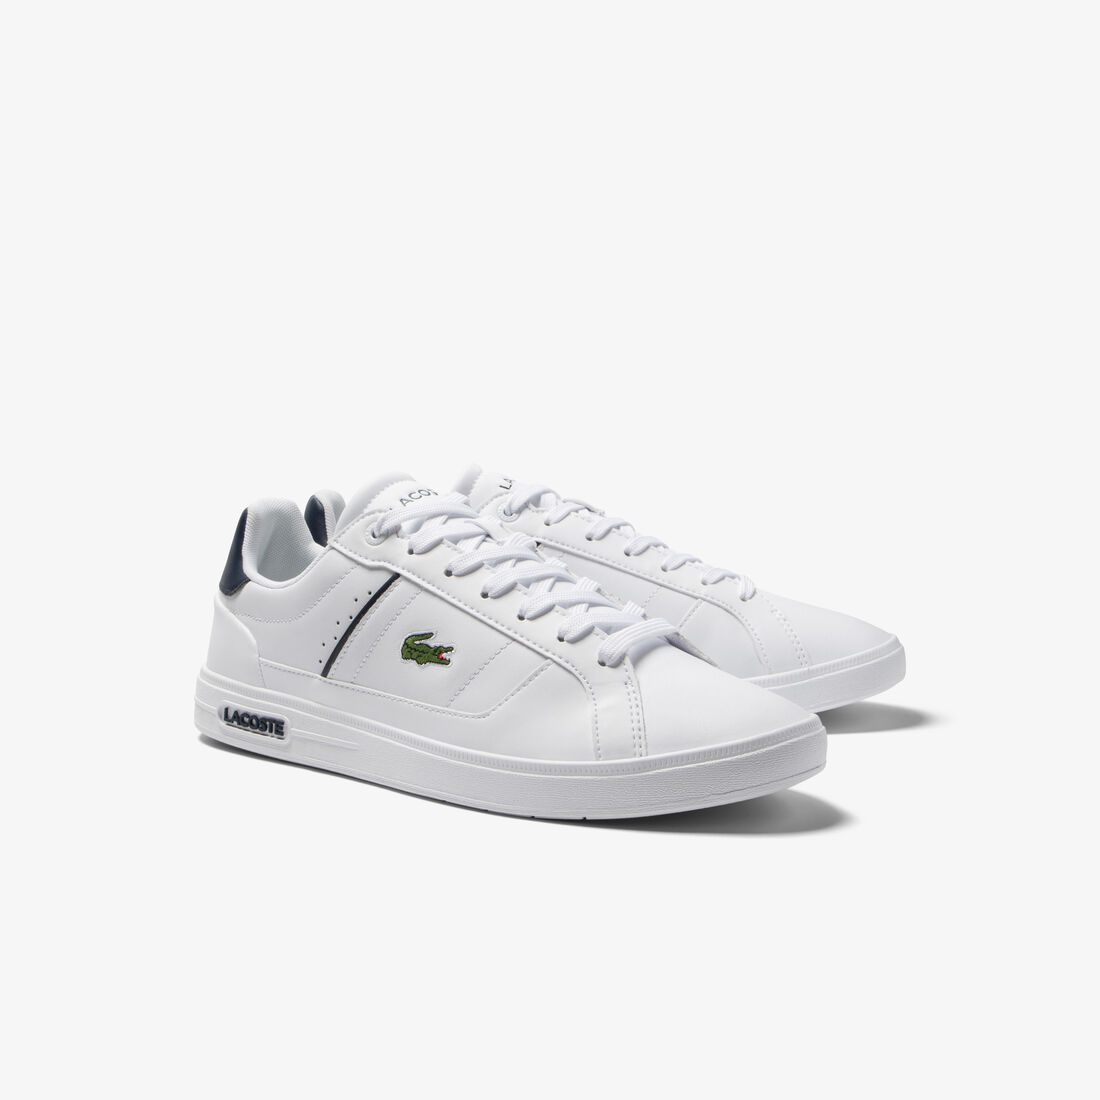 Men's Lacoste Europa Pro Leather Trainers